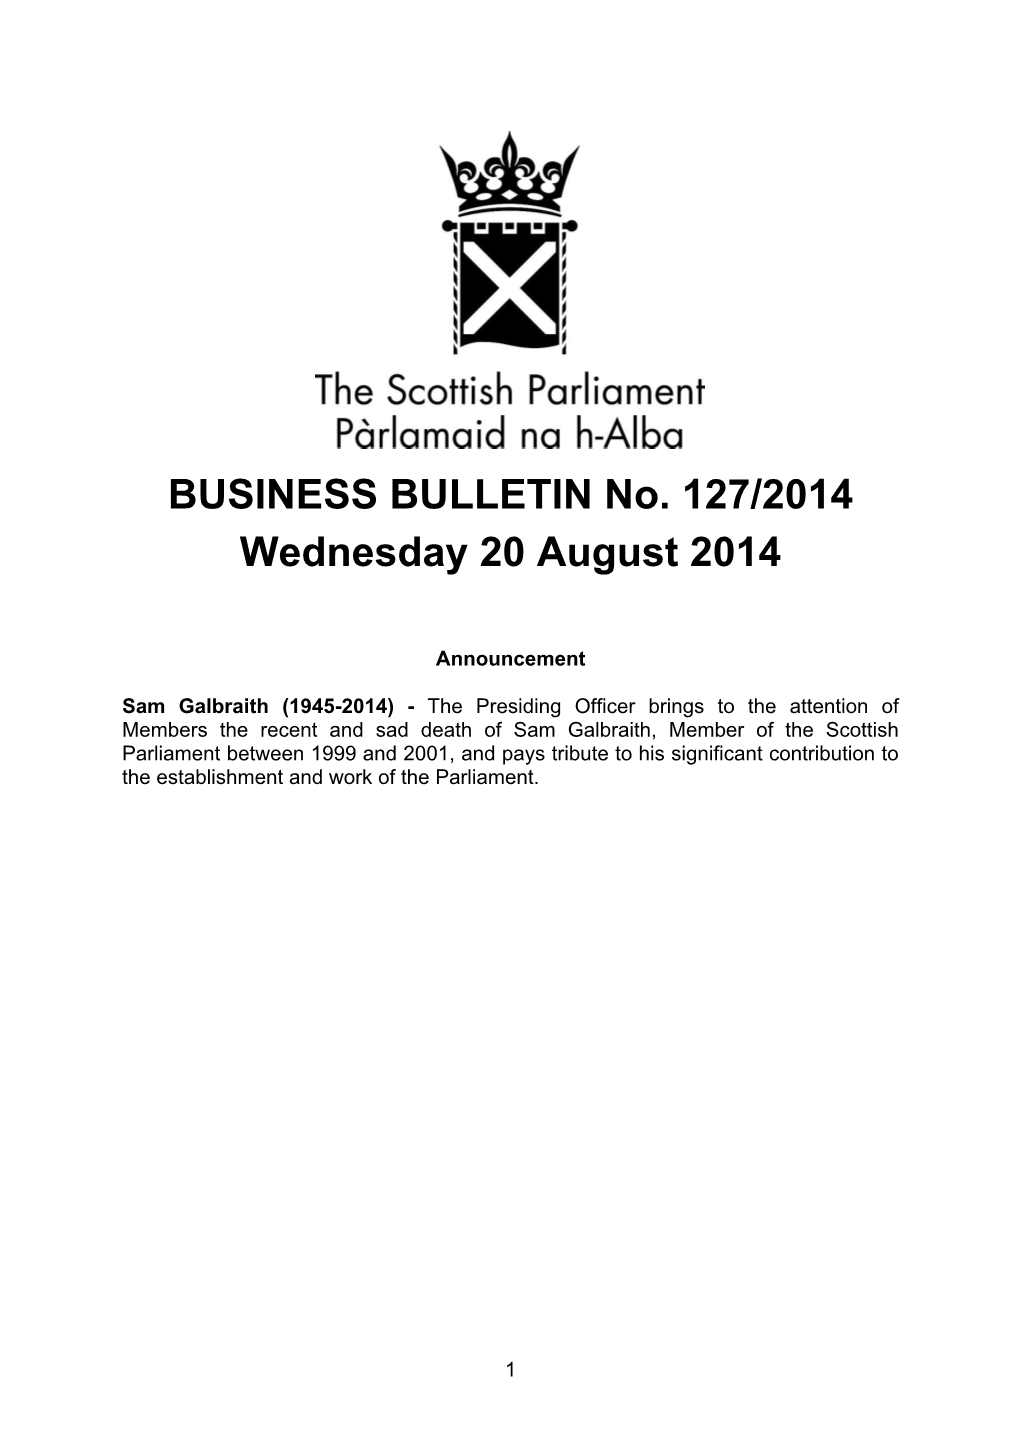 BUSINESS BULLETIN No. 127/2014 Wednesday 20 August 2014